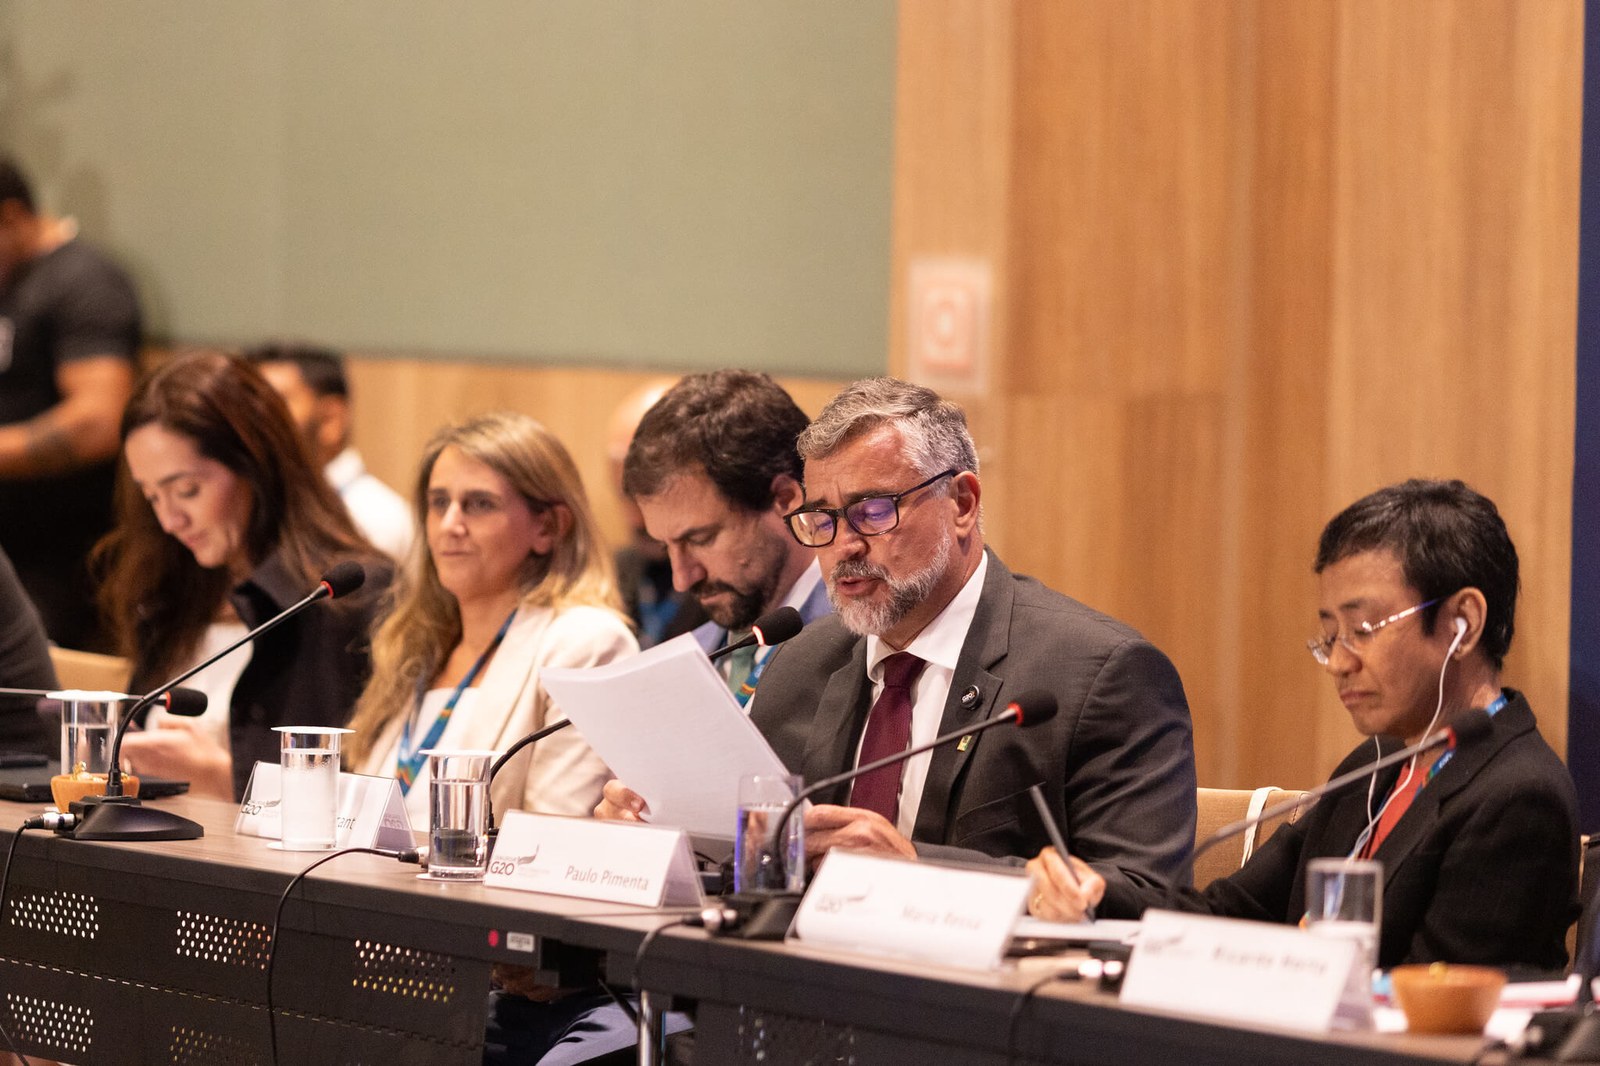 Minister Paulo Pimenta, from Secom/PR, warns of the advance of online hate speech and stresses the similarities among Global South countries to face contemporary challenges | Foto: G20 Brasil Audiovisual